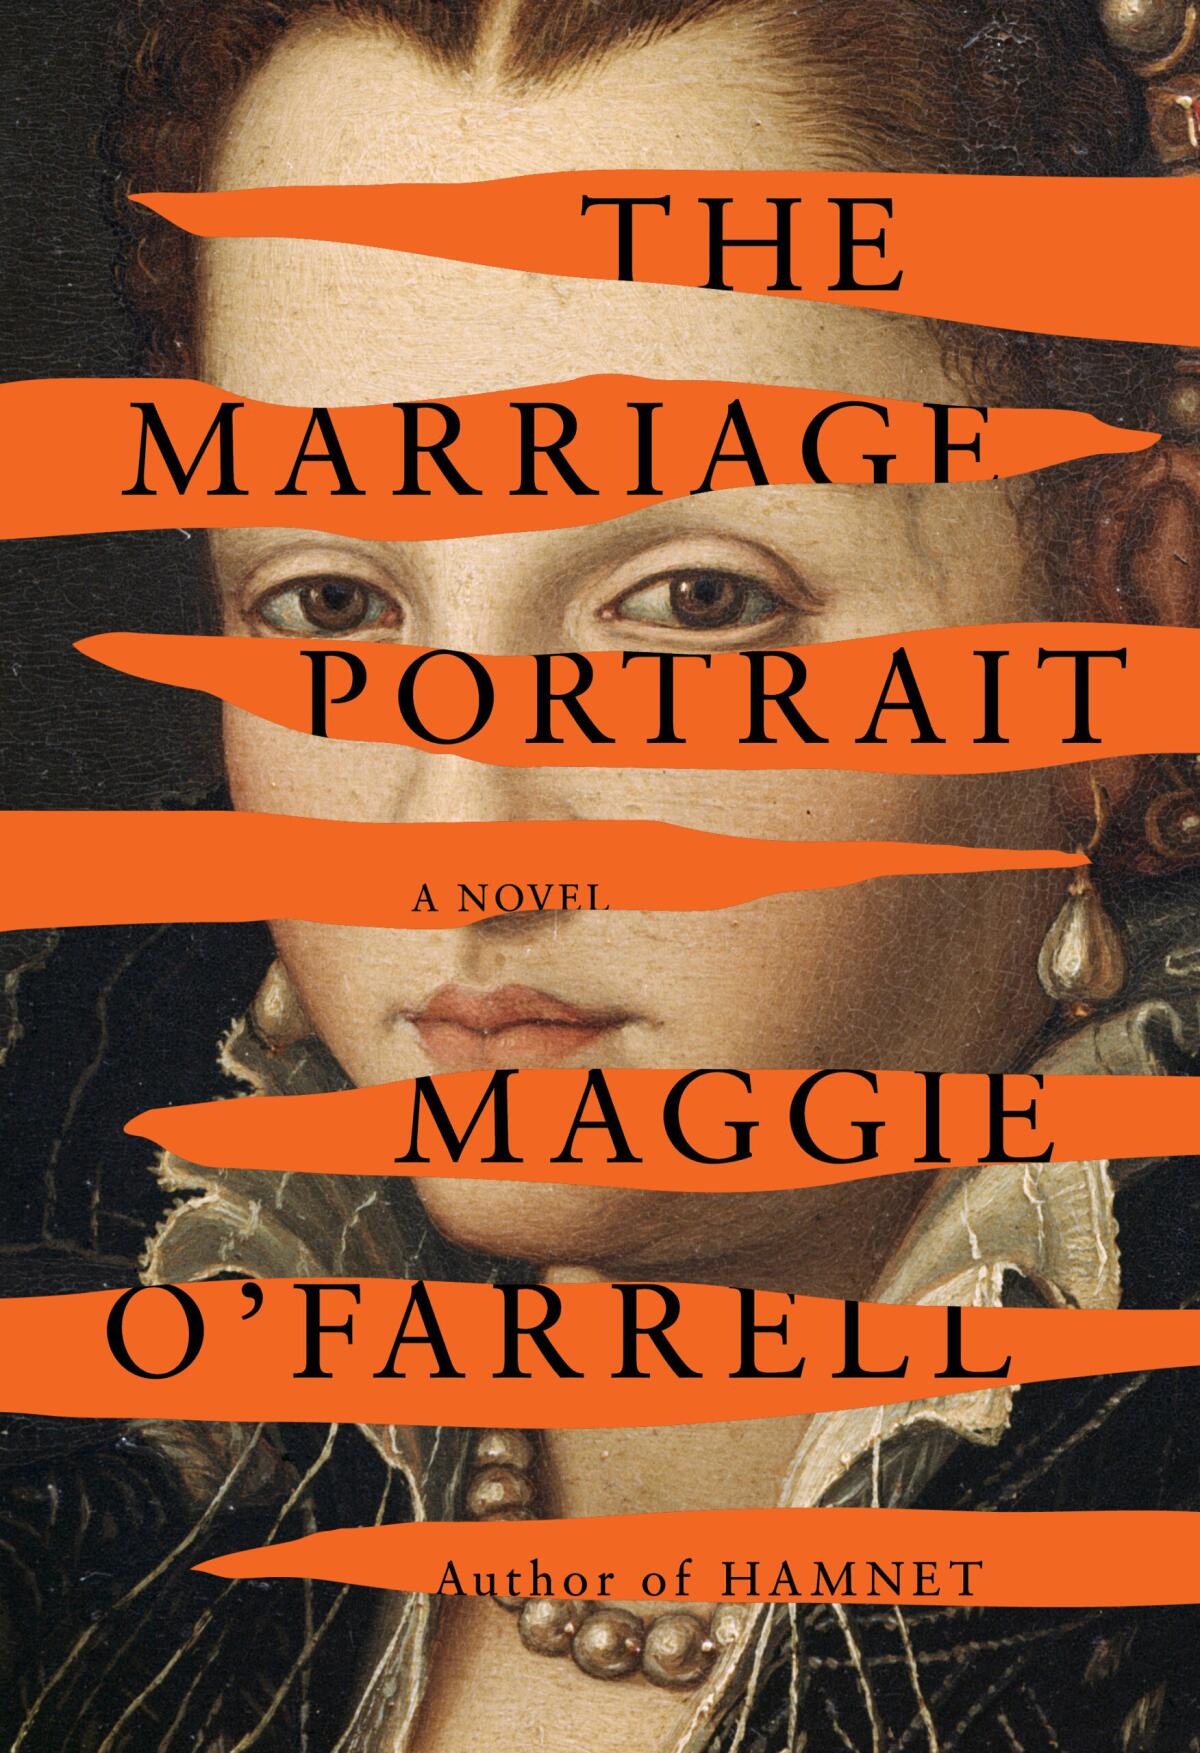 "The Marriage Portrait" by Maggie O'Farrell